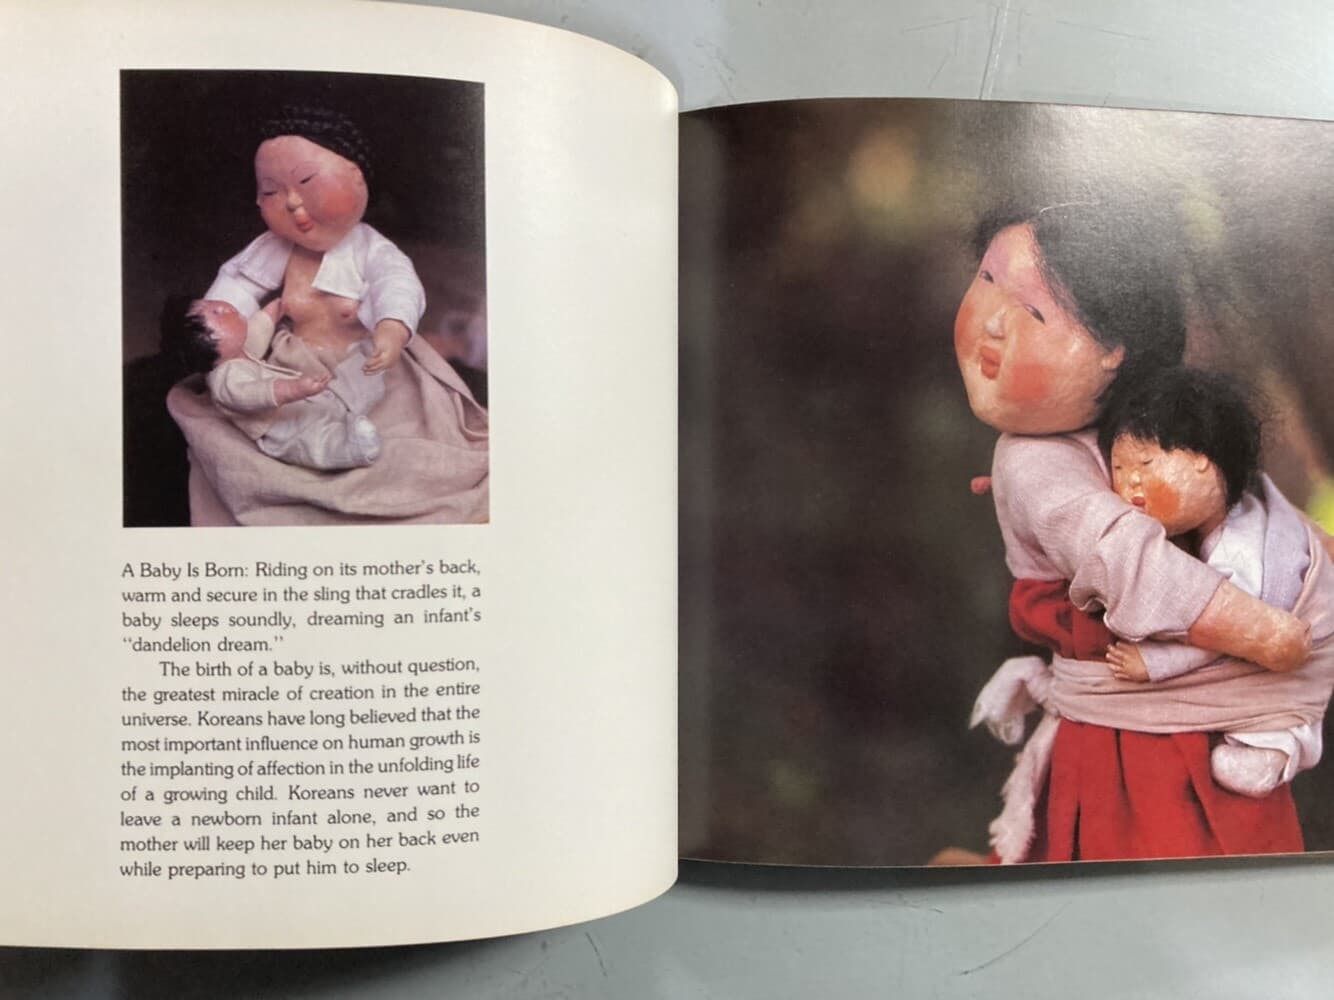 The Family of Dolls - Kim Young Hee‘s Creations of Korean Folk Life